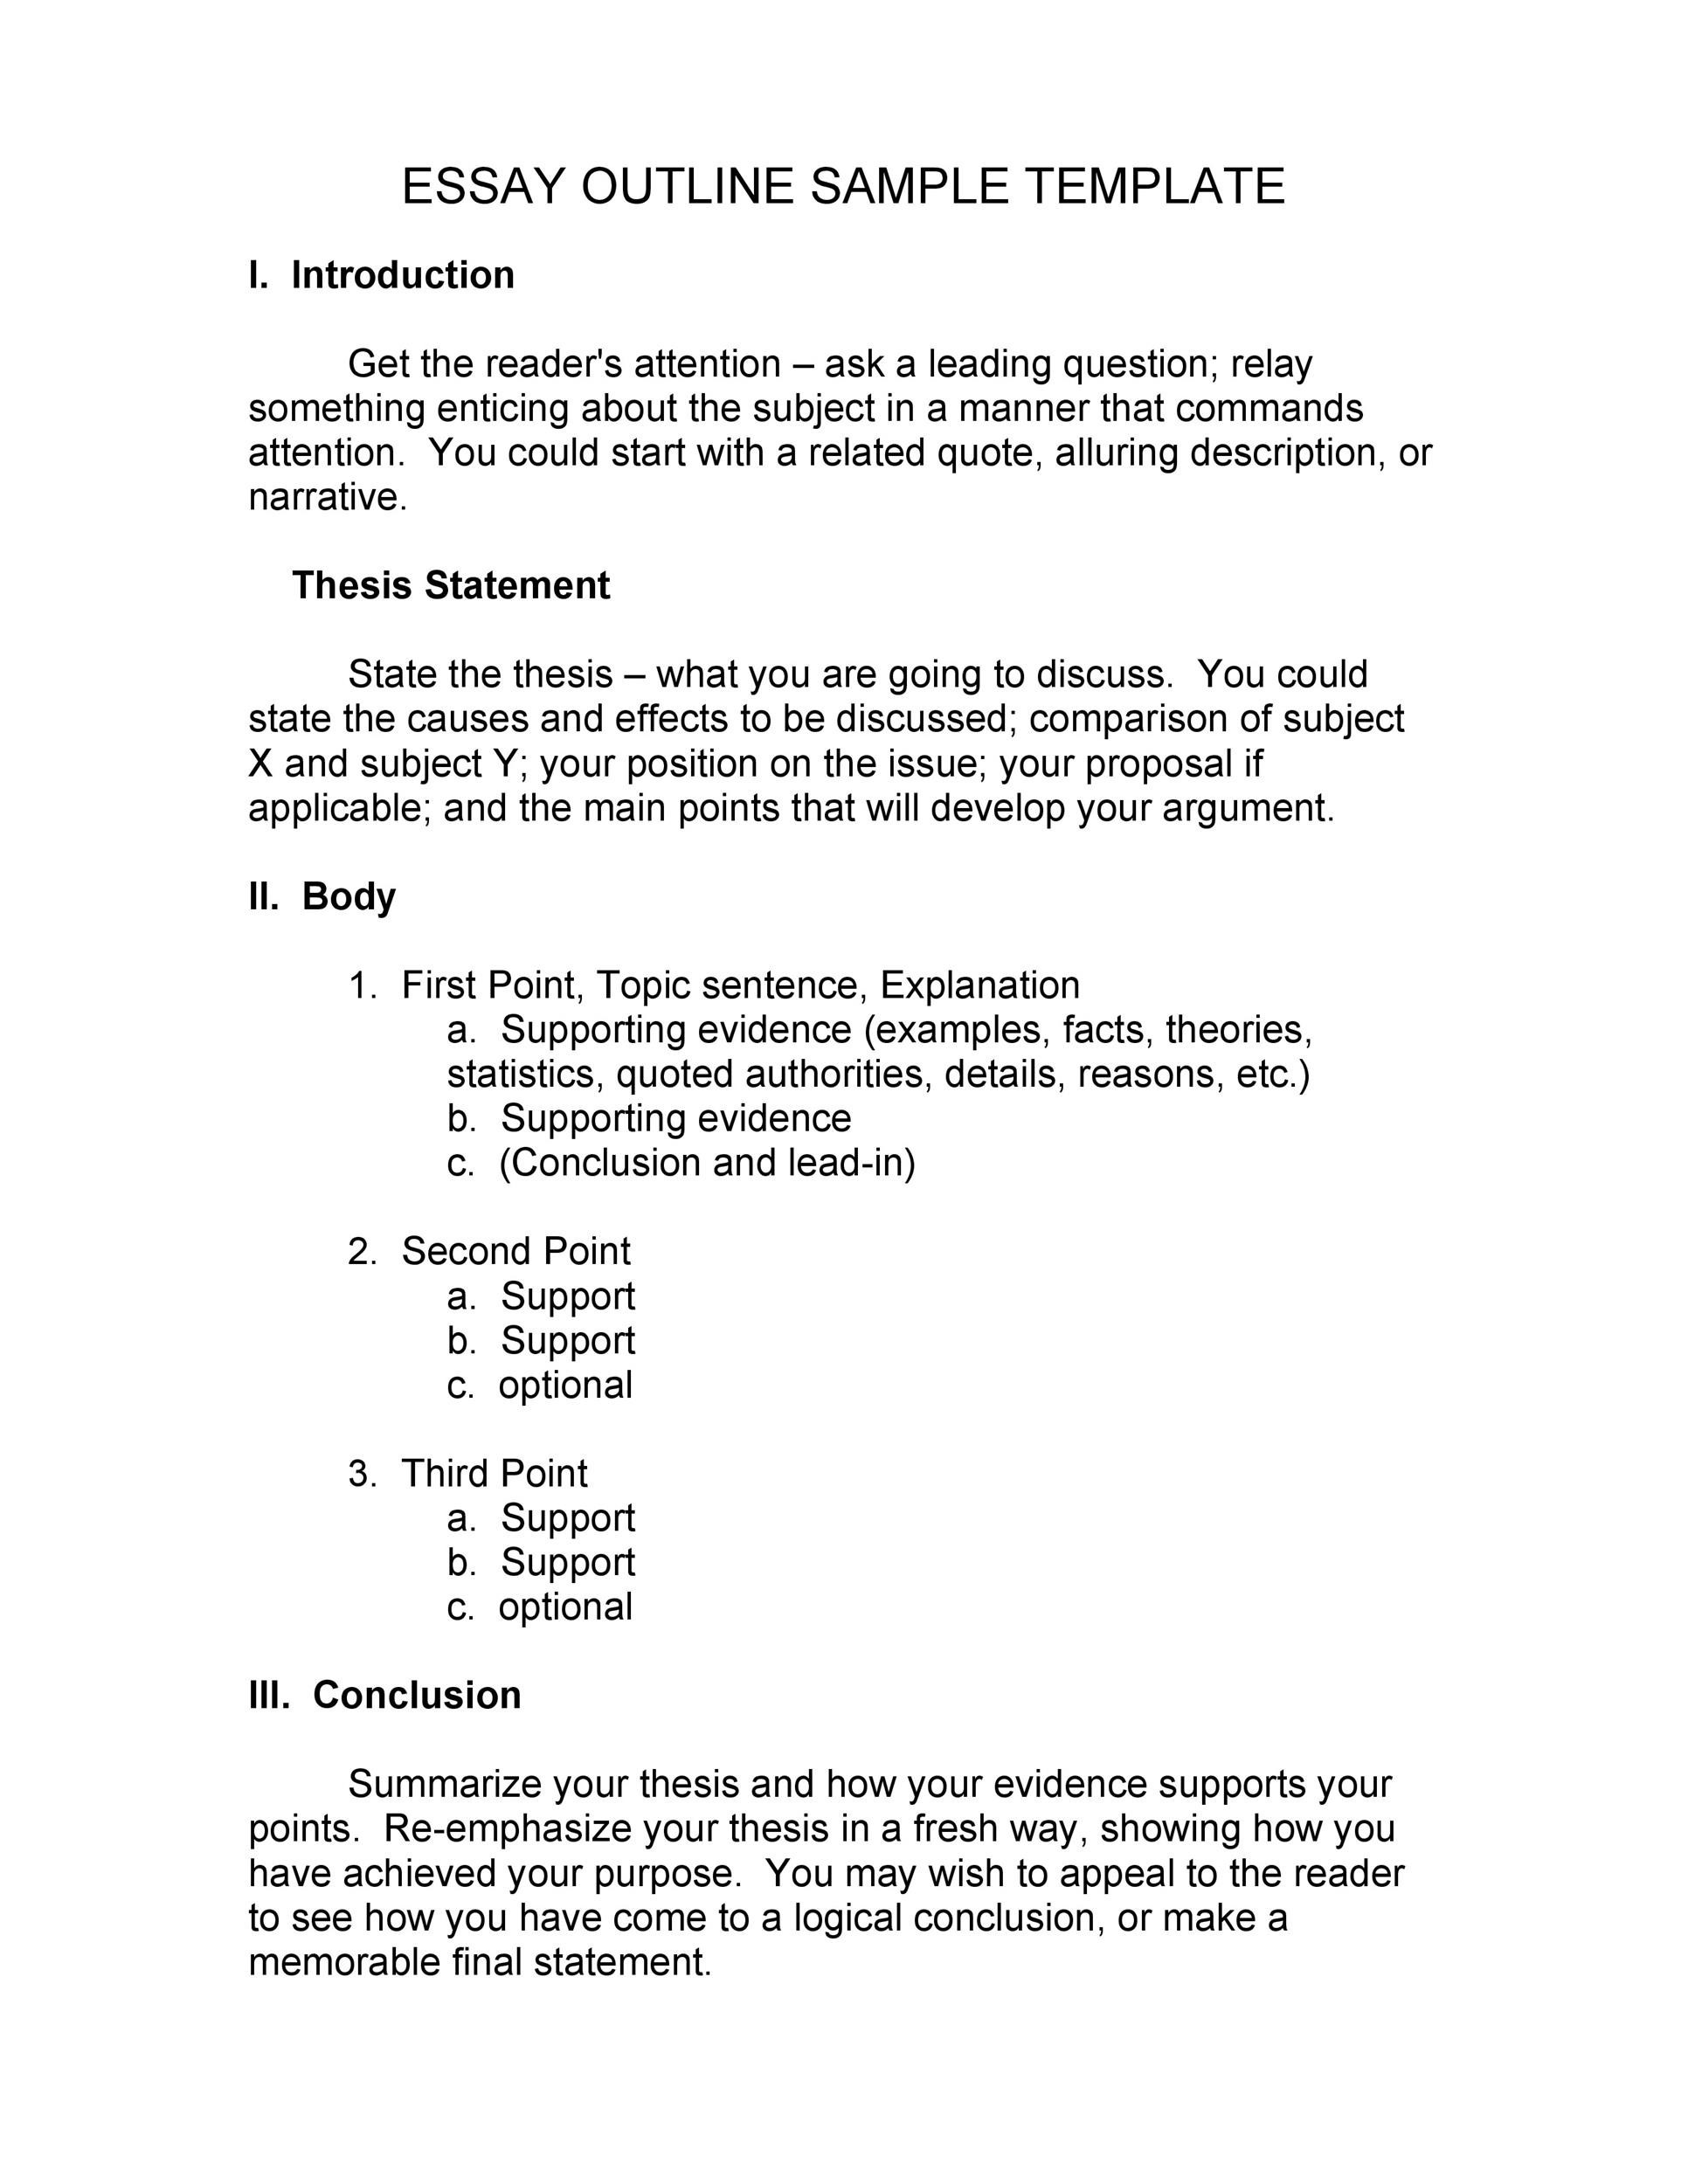 How to Write an Essay Outline - Template and Examples